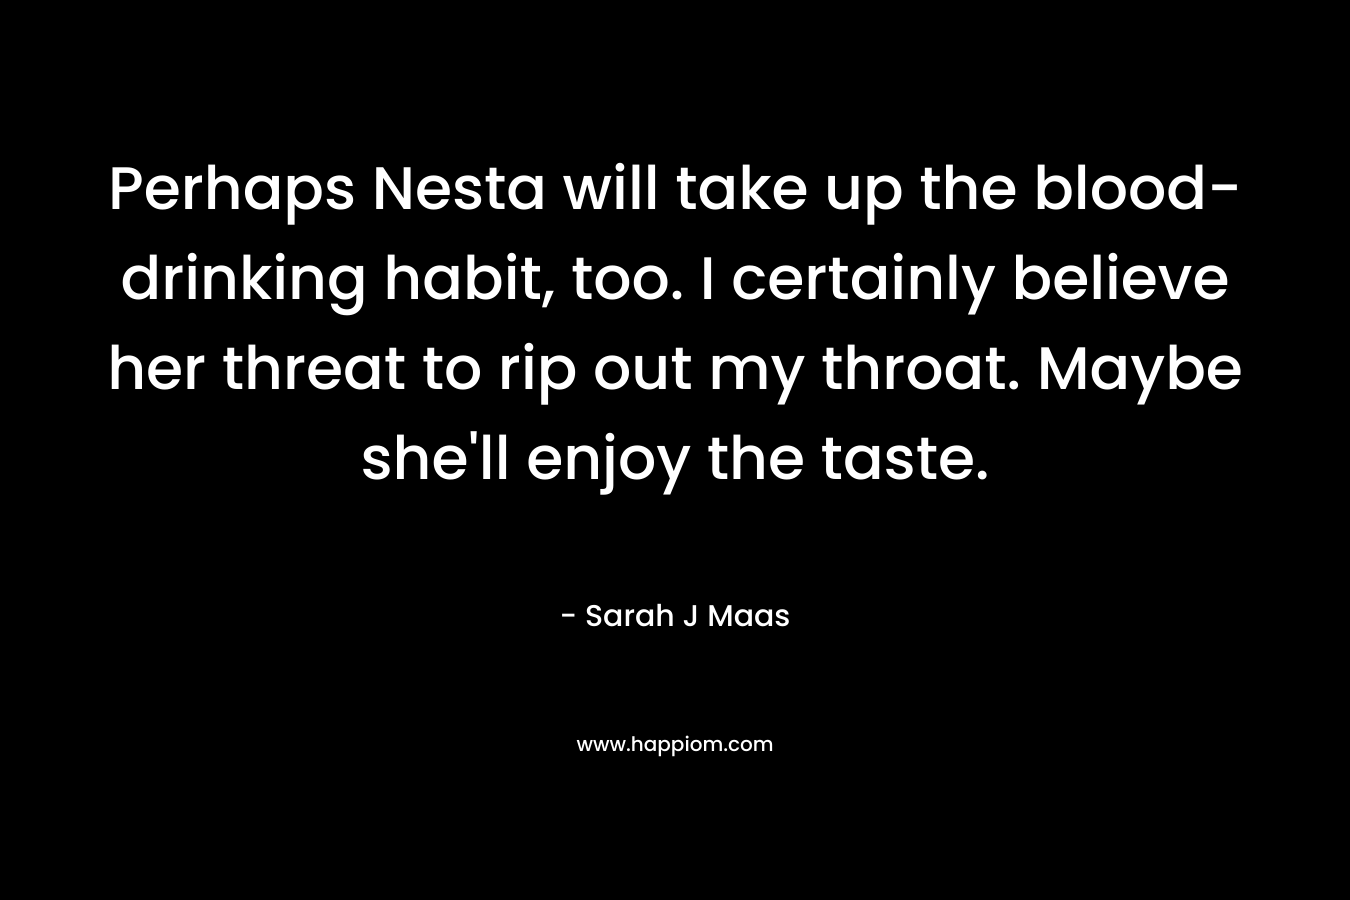 Perhaps Nesta will take up the blood-drinking habit, too. I certainly believe her threat to rip out my throat. Maybe she'll enjoy the taste.